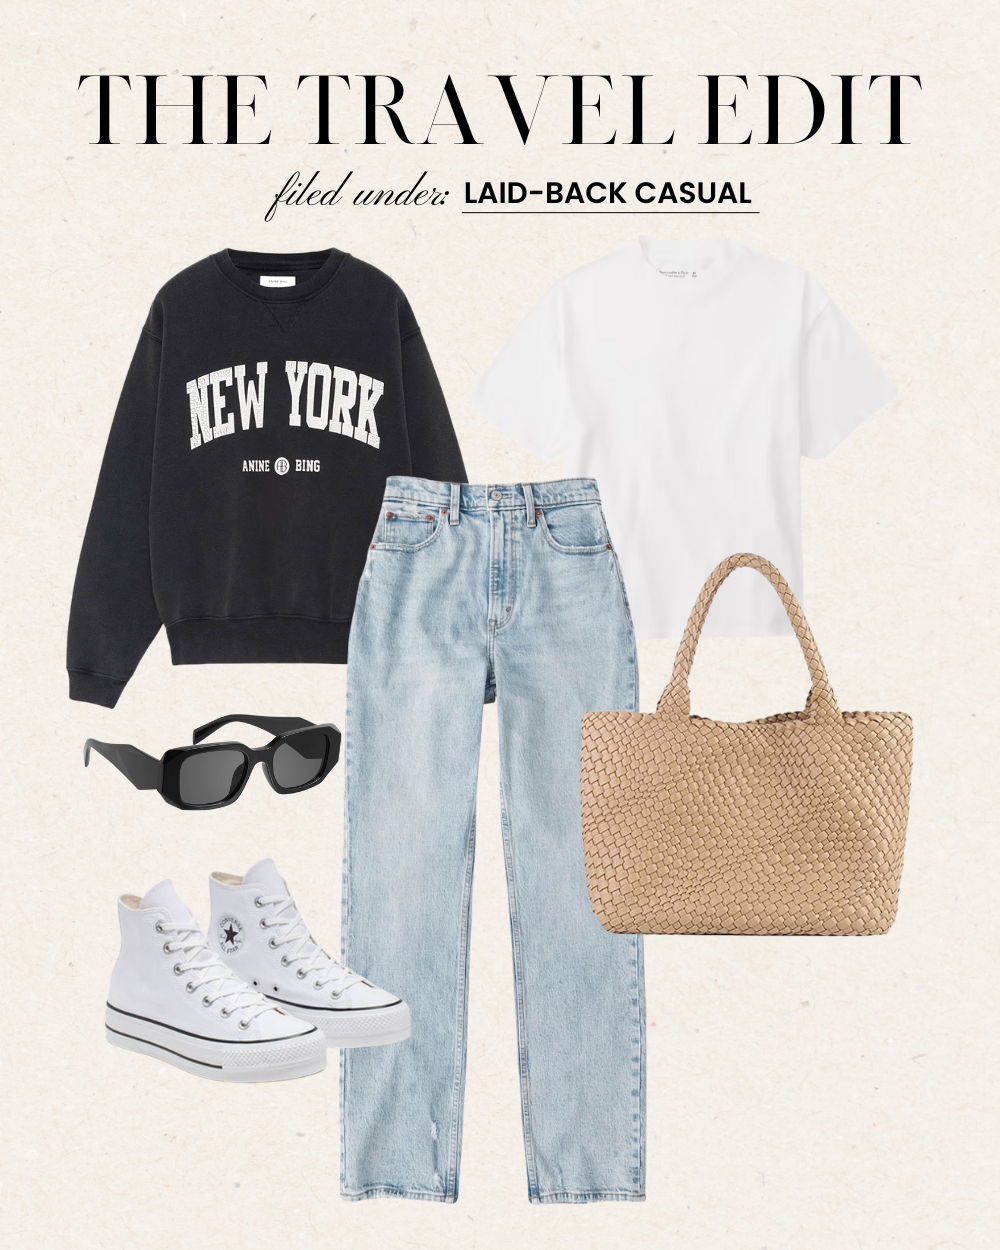 h&m travel outfits